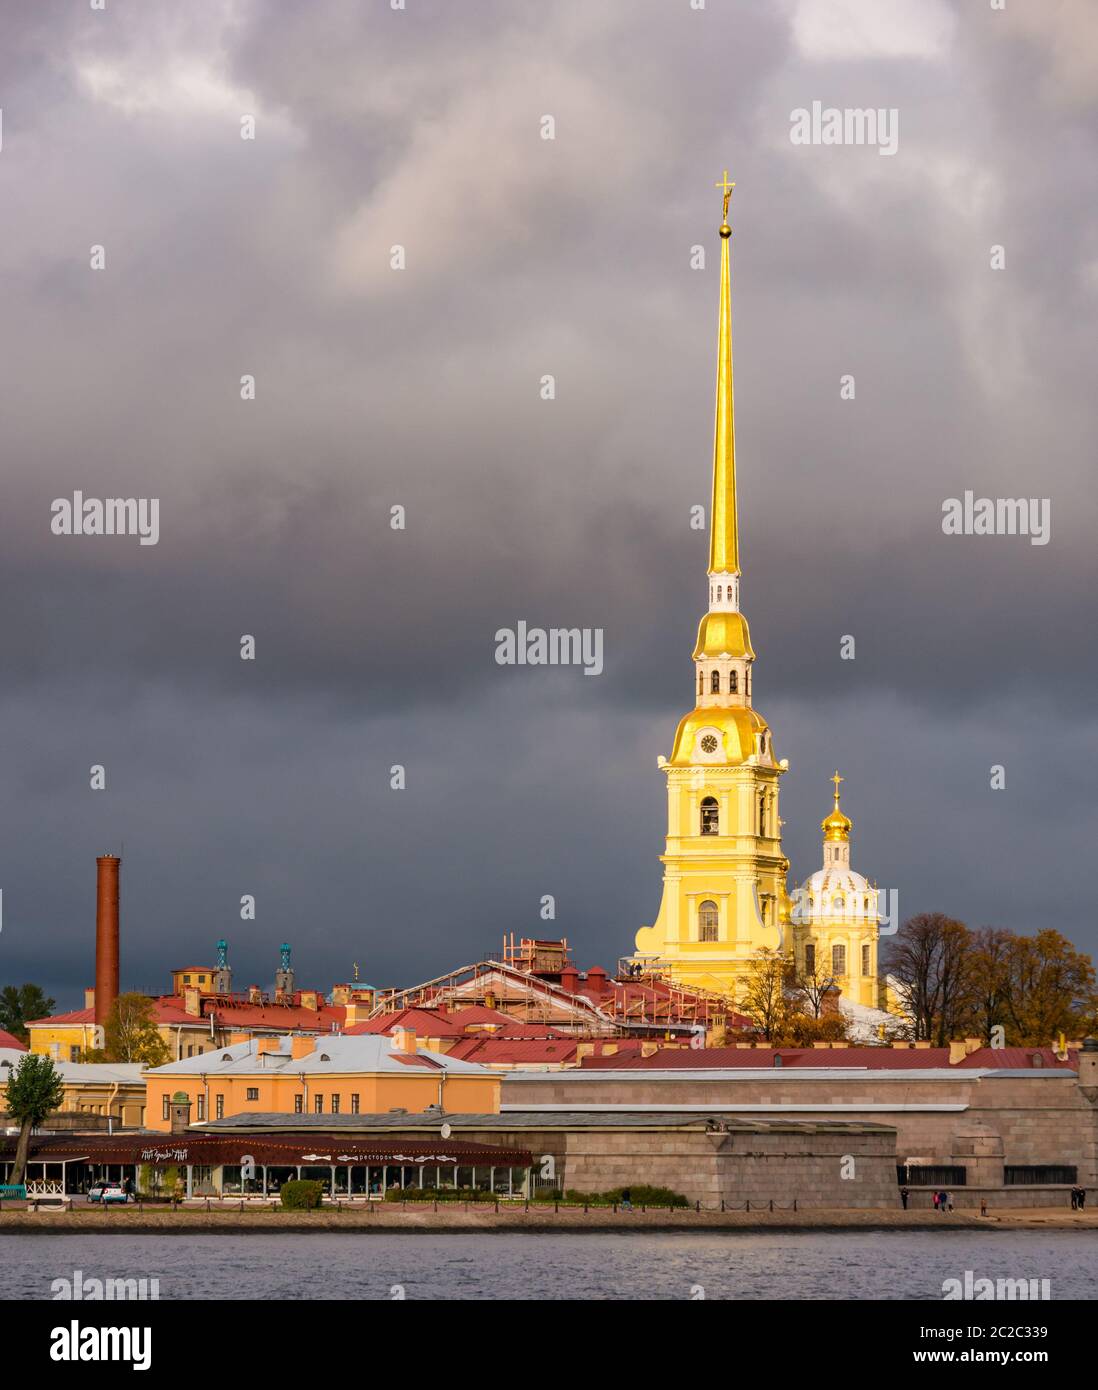 Peter and Paul Cathedral spire, Peter and Paul Fortress on Neva River with moody stormy sky, St Petersburg, Russia Stock Photo